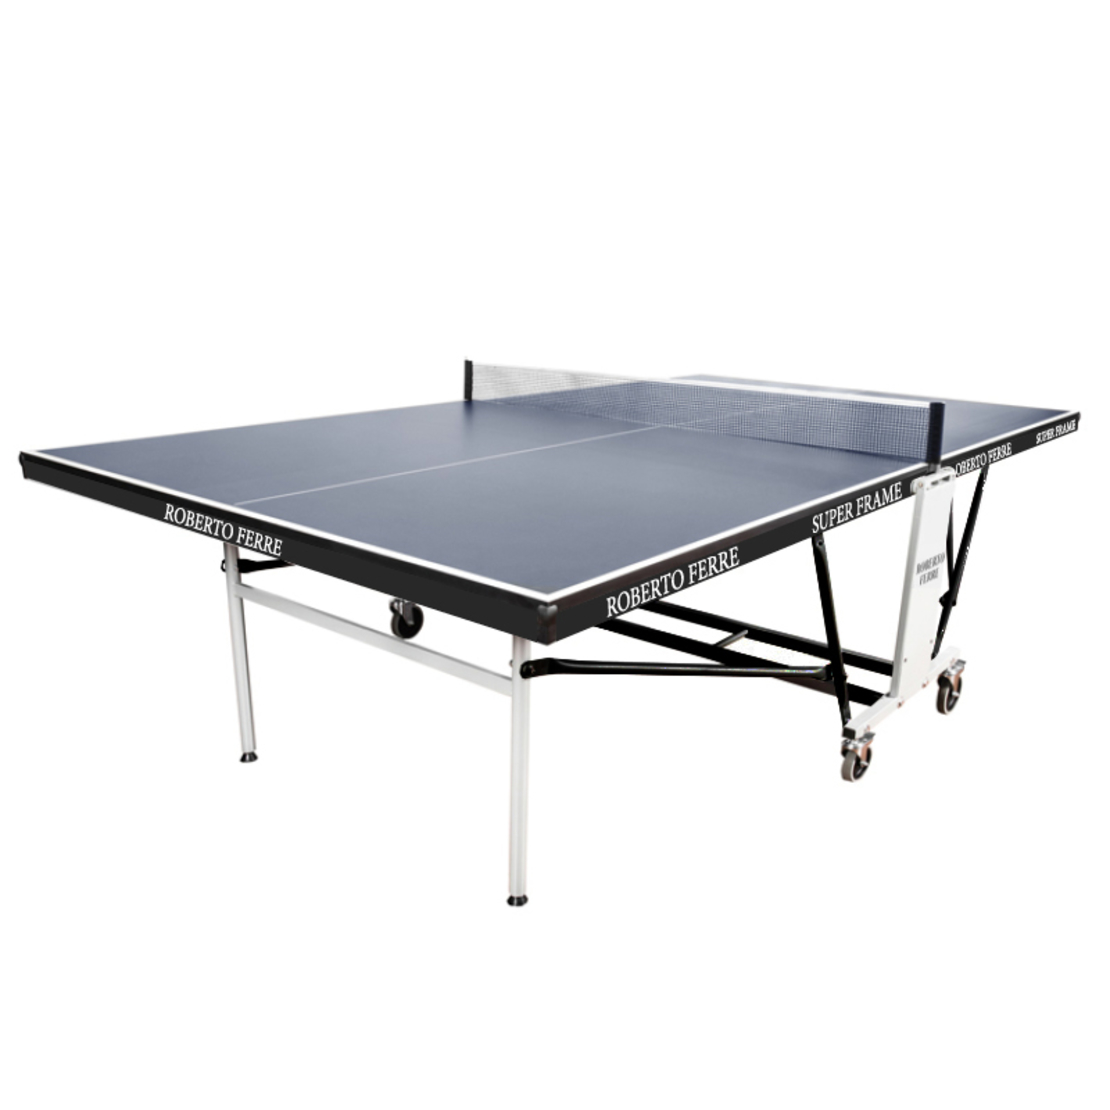 PING PONG TABLE ROBERTO FERRE SILVER FRAME 3